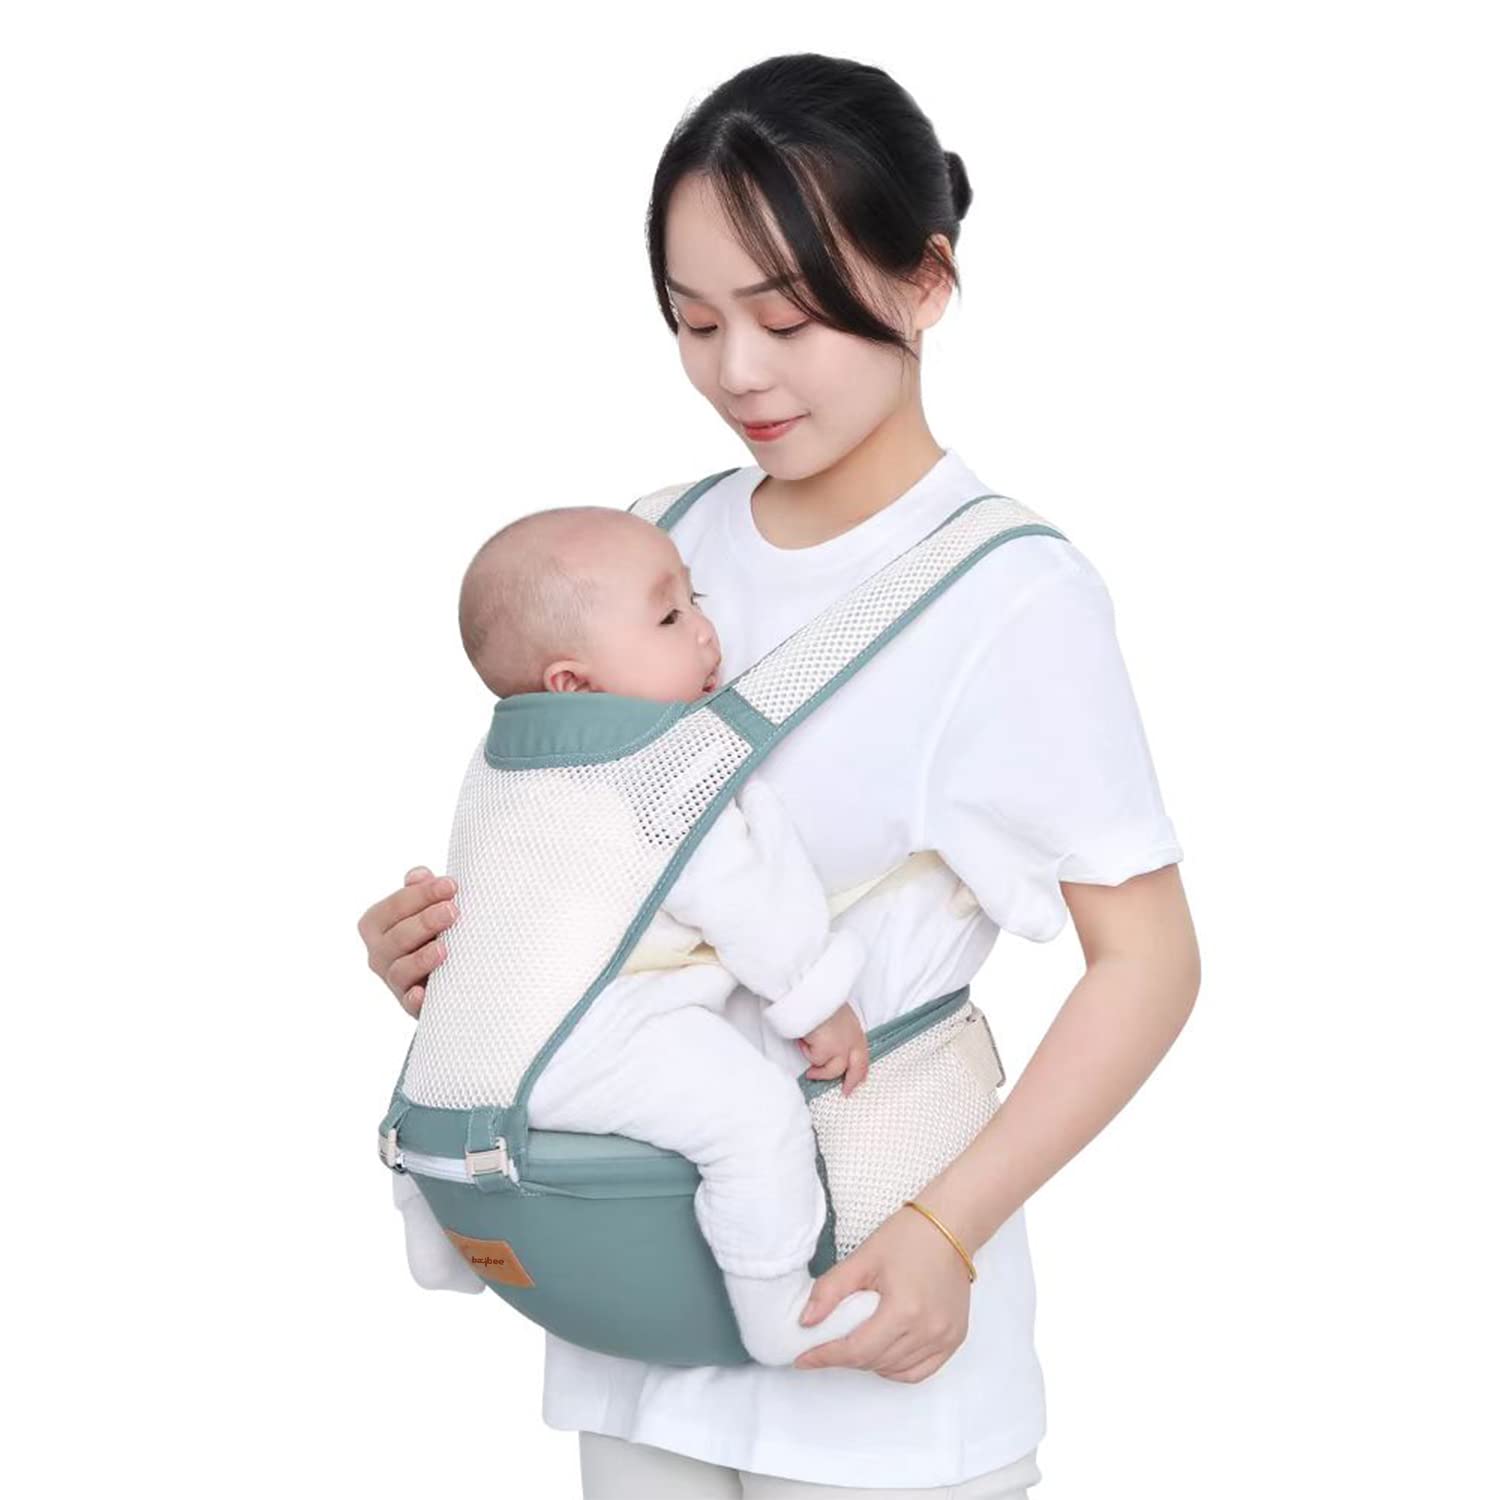 Buy SPIRITED Baby Carrier Bags/Baby Belt/Baby Safety Bag/Baby Sling Carrier/ Baby Front Carrier/Baby Back Carrier/Baby Holding Belt with Waist Belt  (Cherry Red) Online at Low Prices in India - Amazon.in